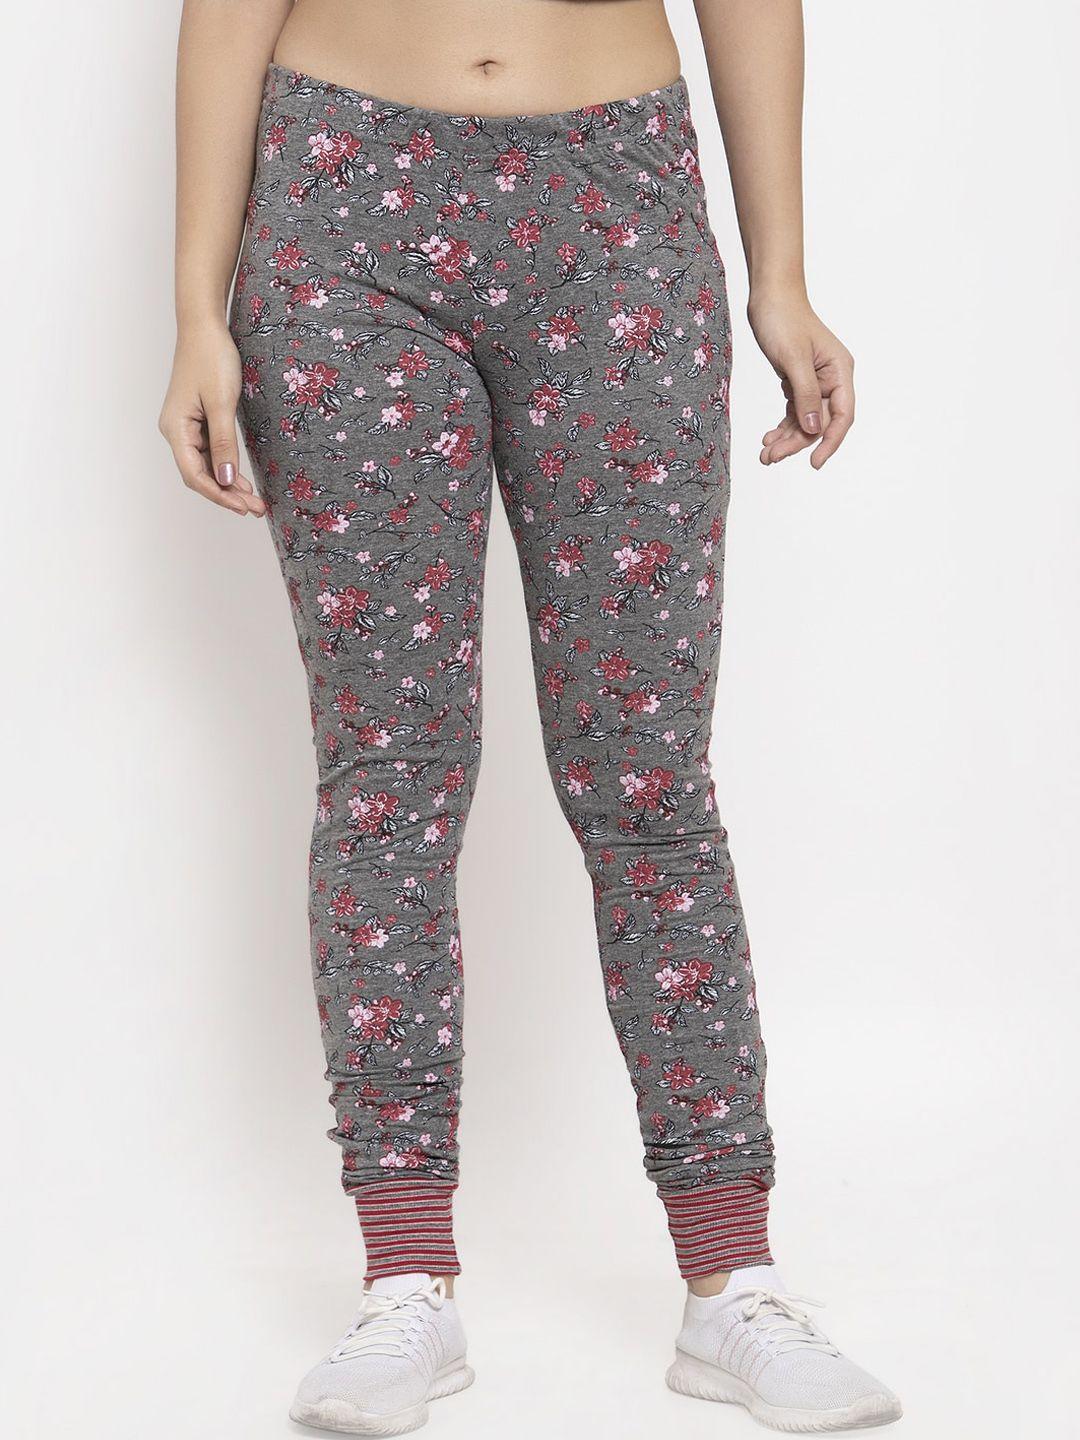 wolfpack women charcoal grey & red floral printed cotton ankle-length leggings